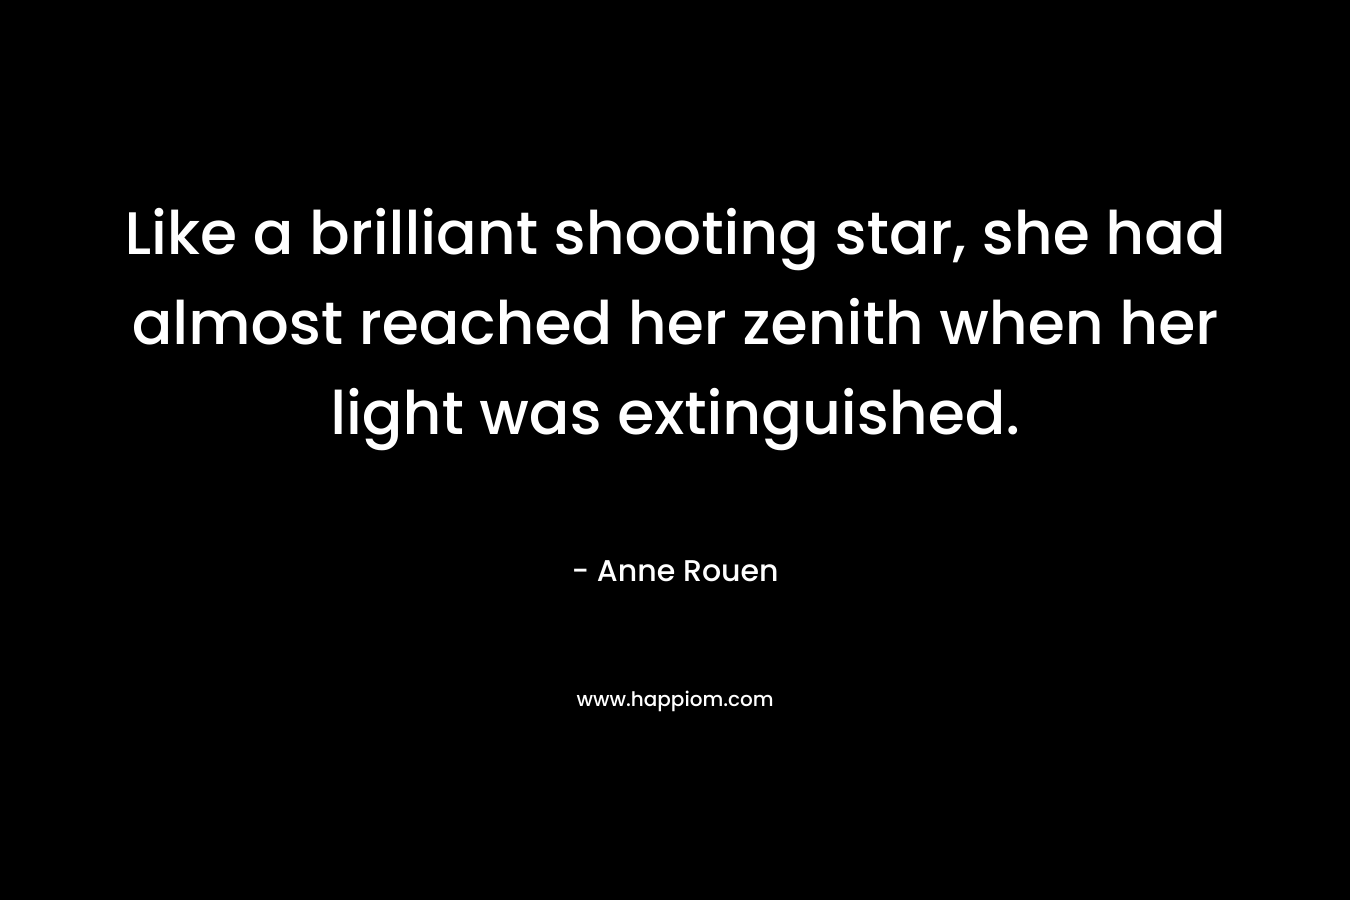 Like a brilliant shooting star, she had almost reached her zenith when her light was extinguished. – Anne Rouen